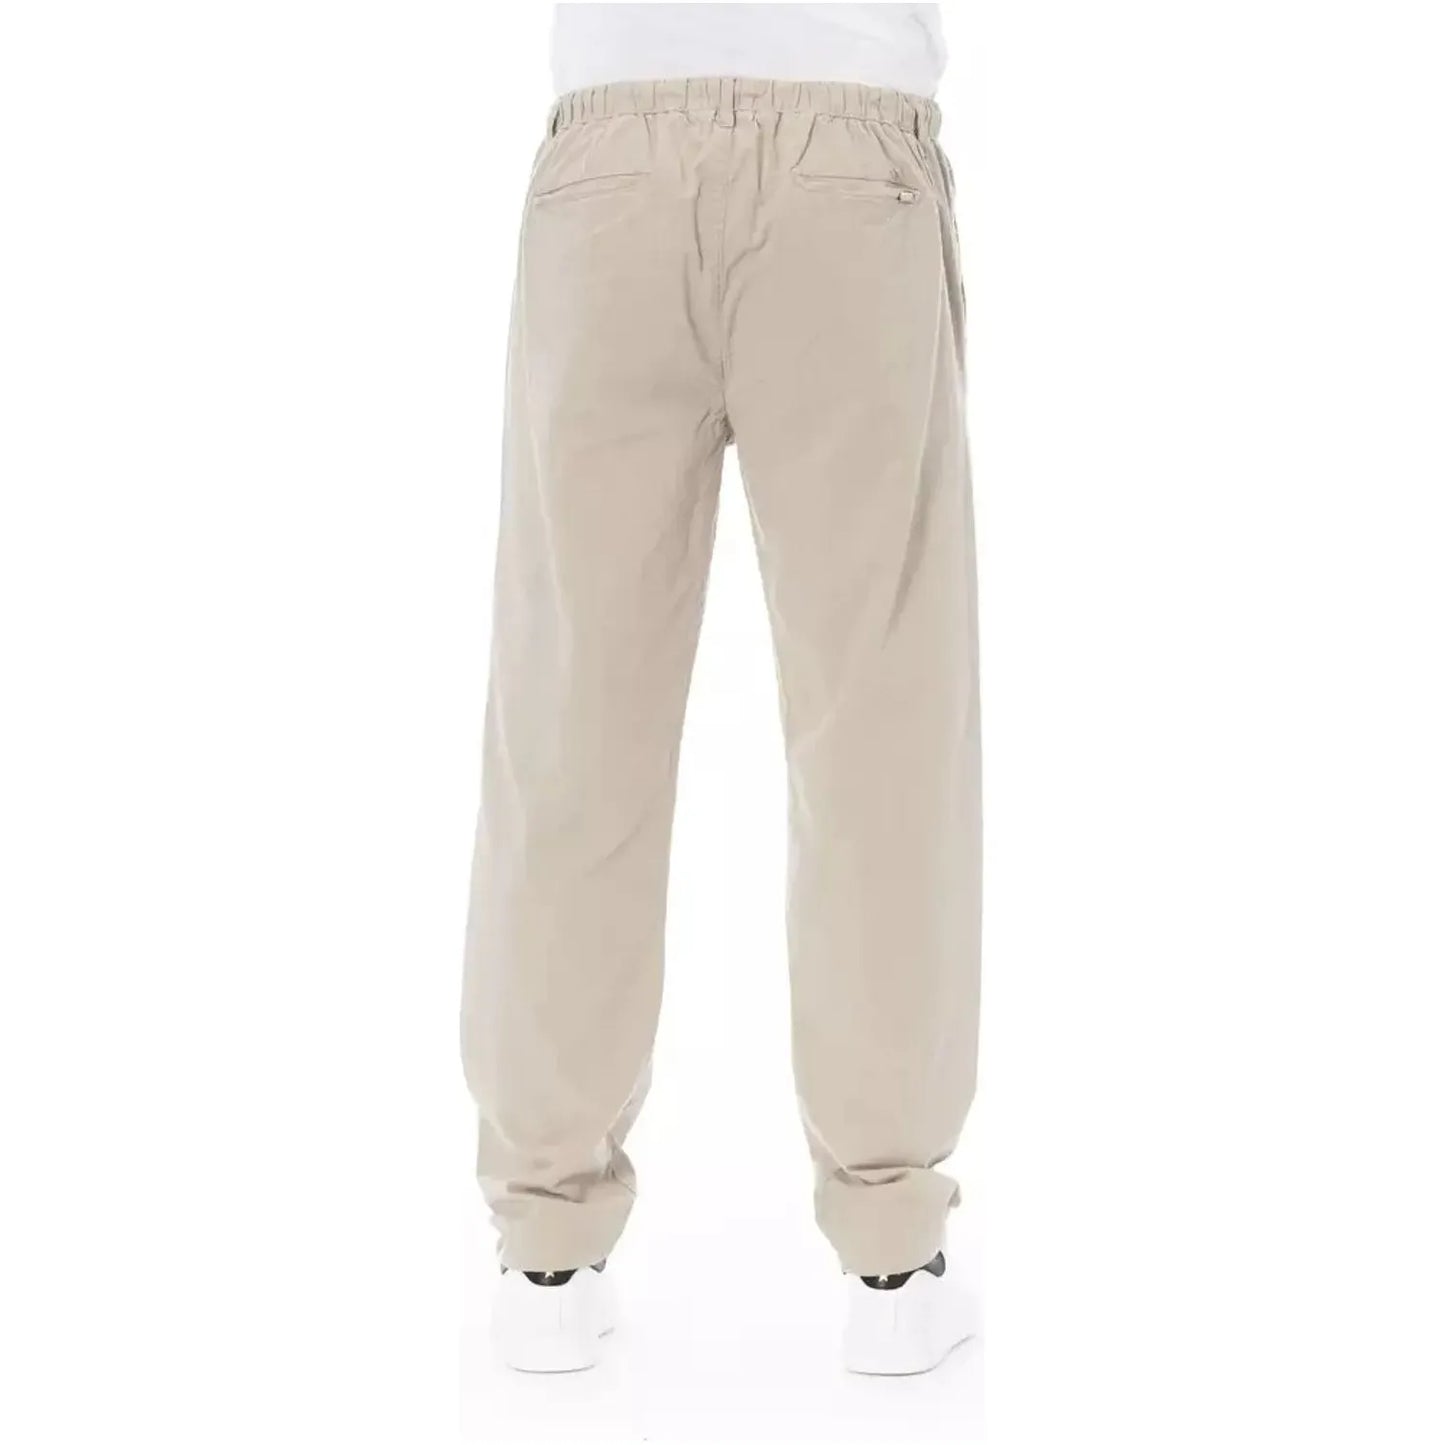 Baldinini Trend Chic Beige Chino Trousers for Men beige-cotton-jeans-pant-20 product-23135-1013086053-18-6ceb2cf6-4a4.webp